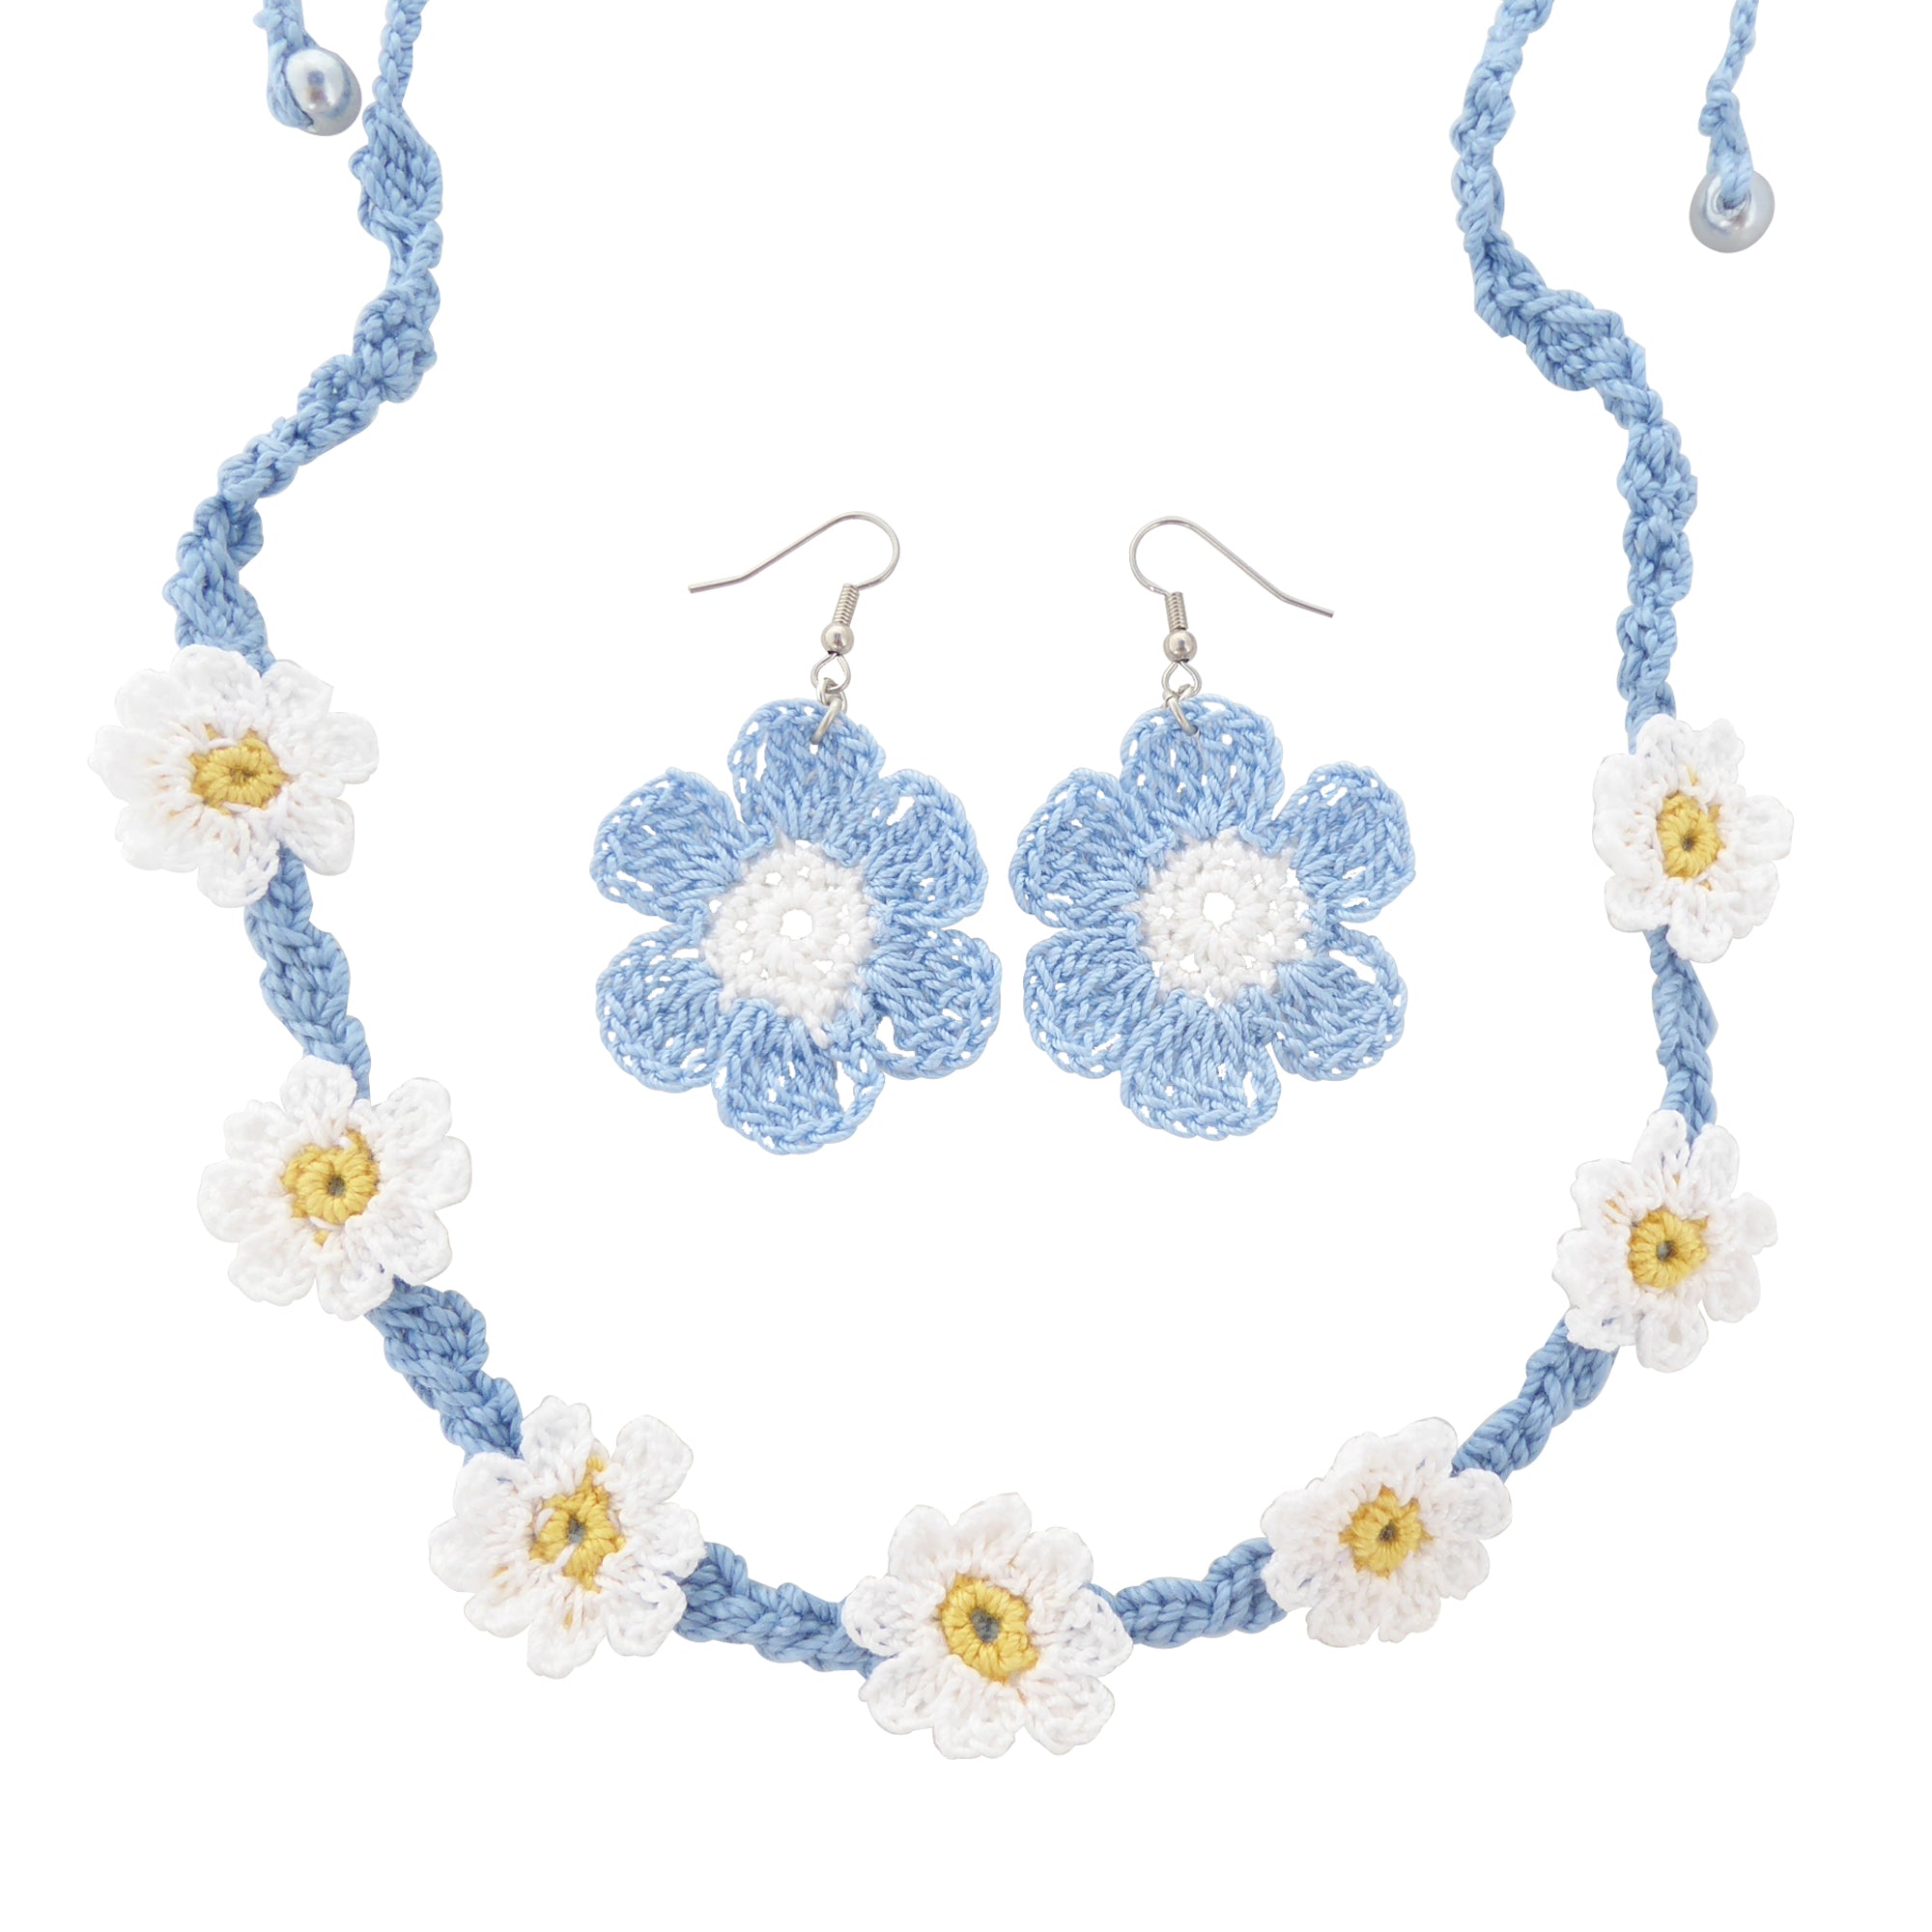 Blue and white flower crochet earring and necklace set by Jenny Dayco 1